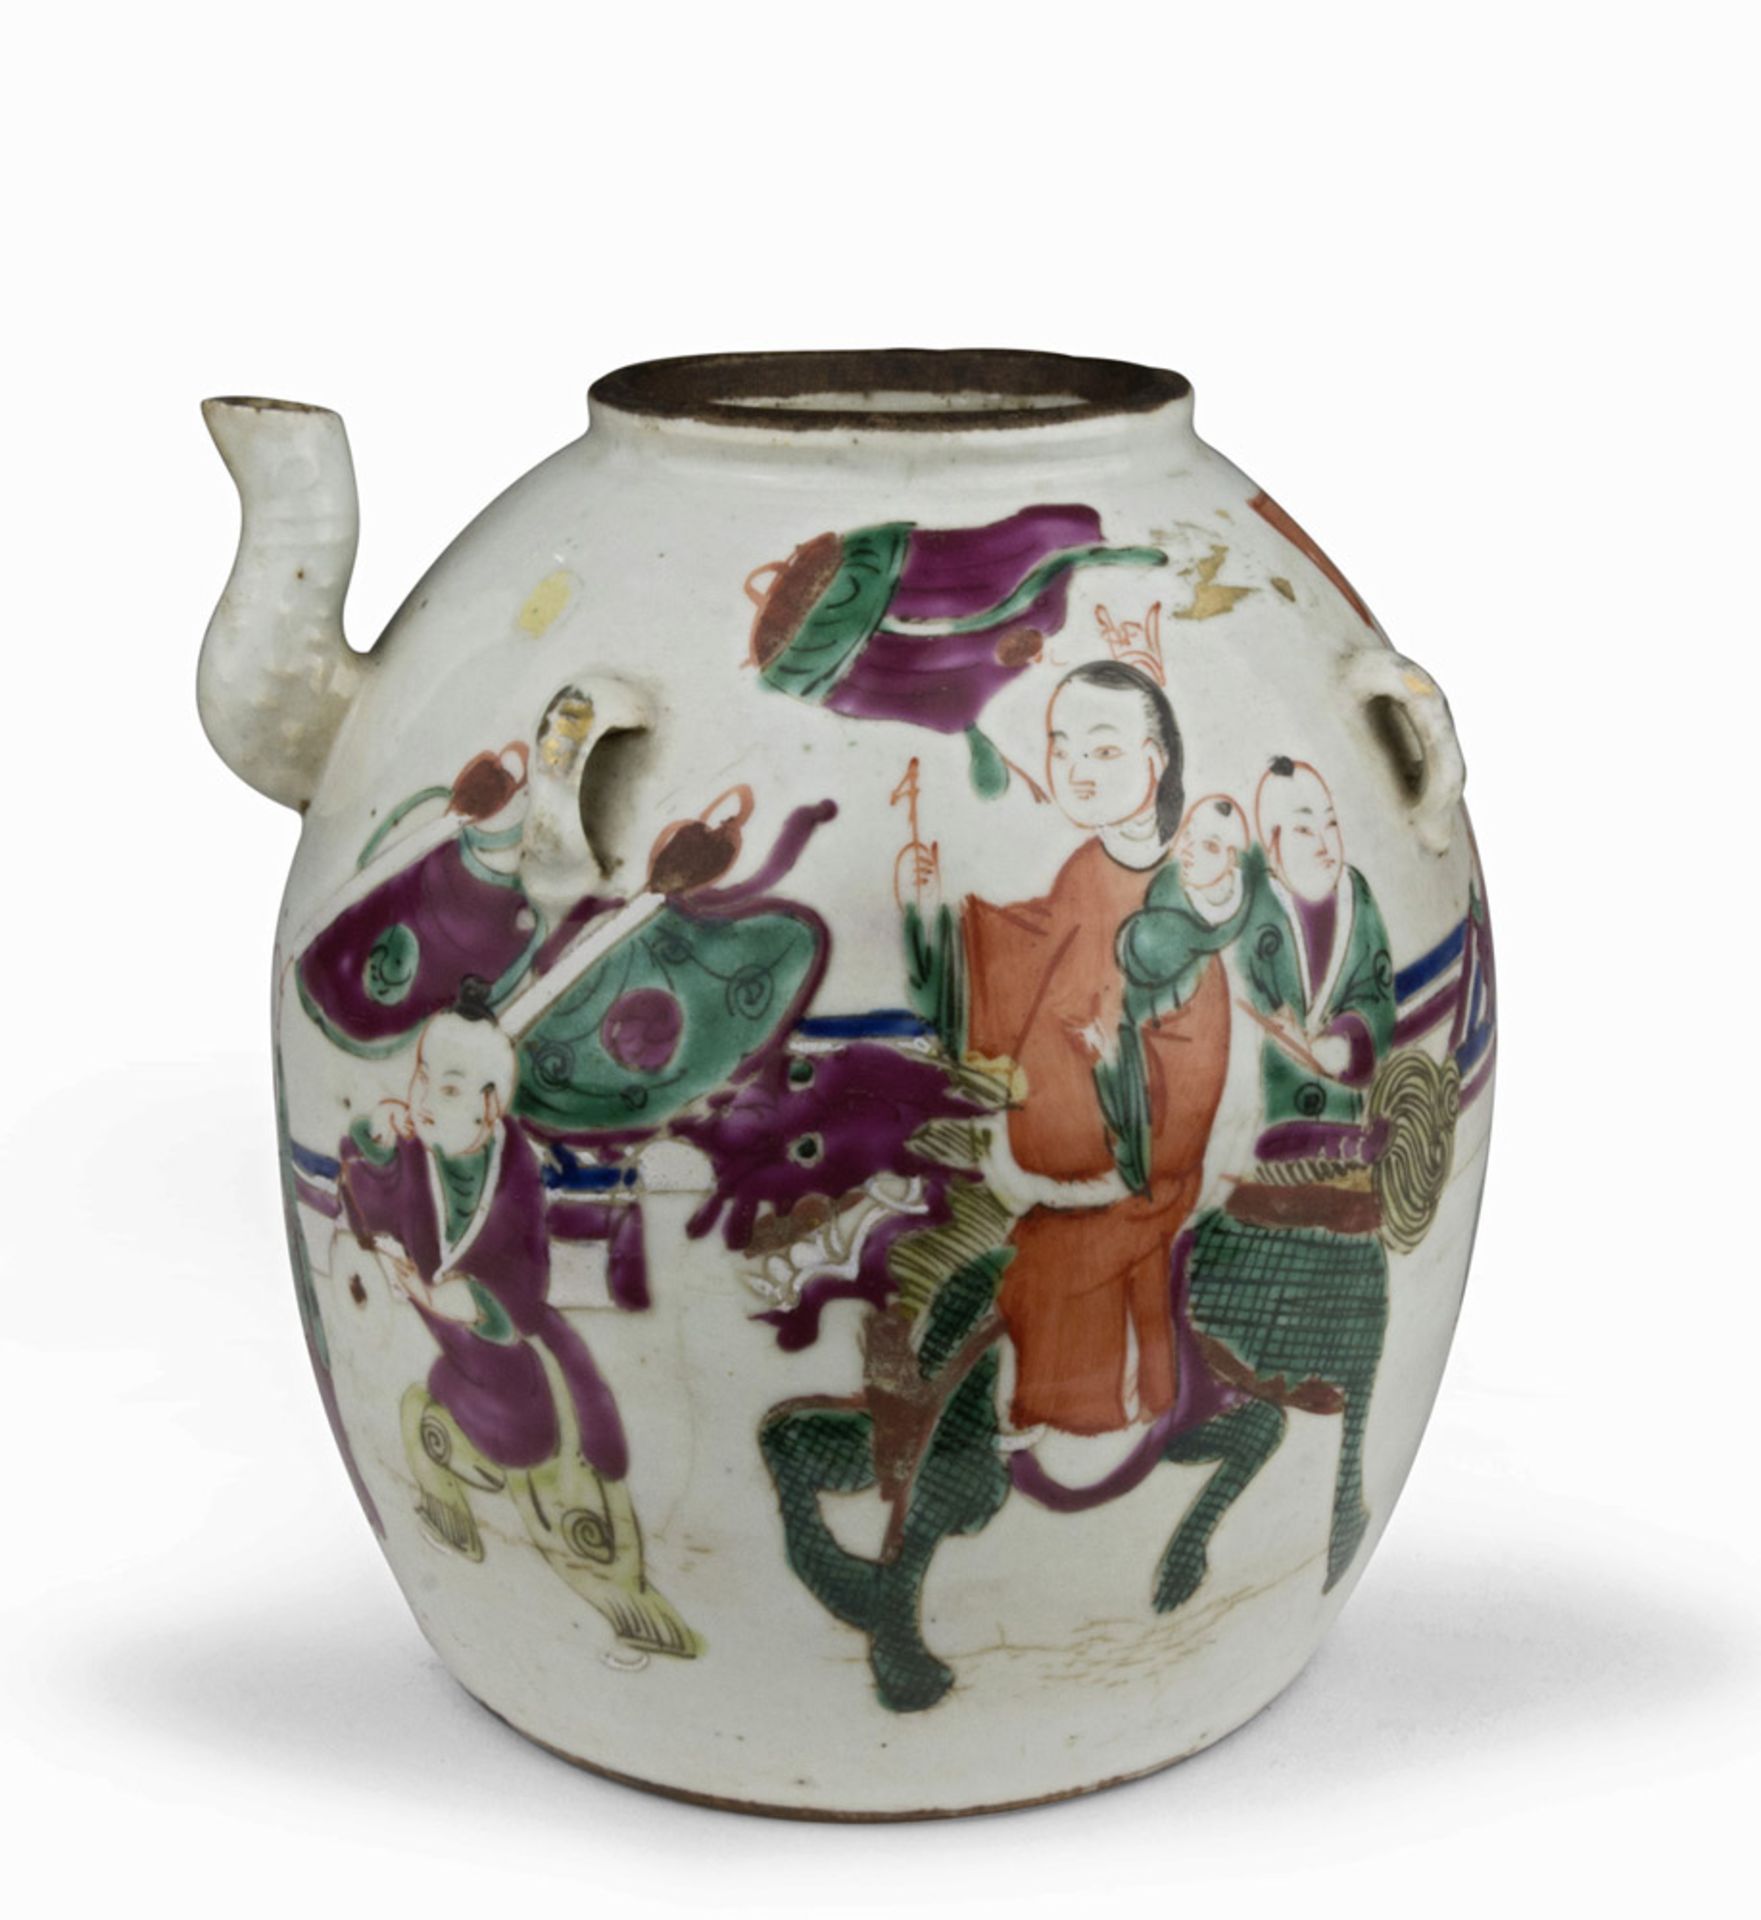 LARGE POLYCHROME PORCELAIN TEAPOT, CHINA, EARLY 20TH CENTURY